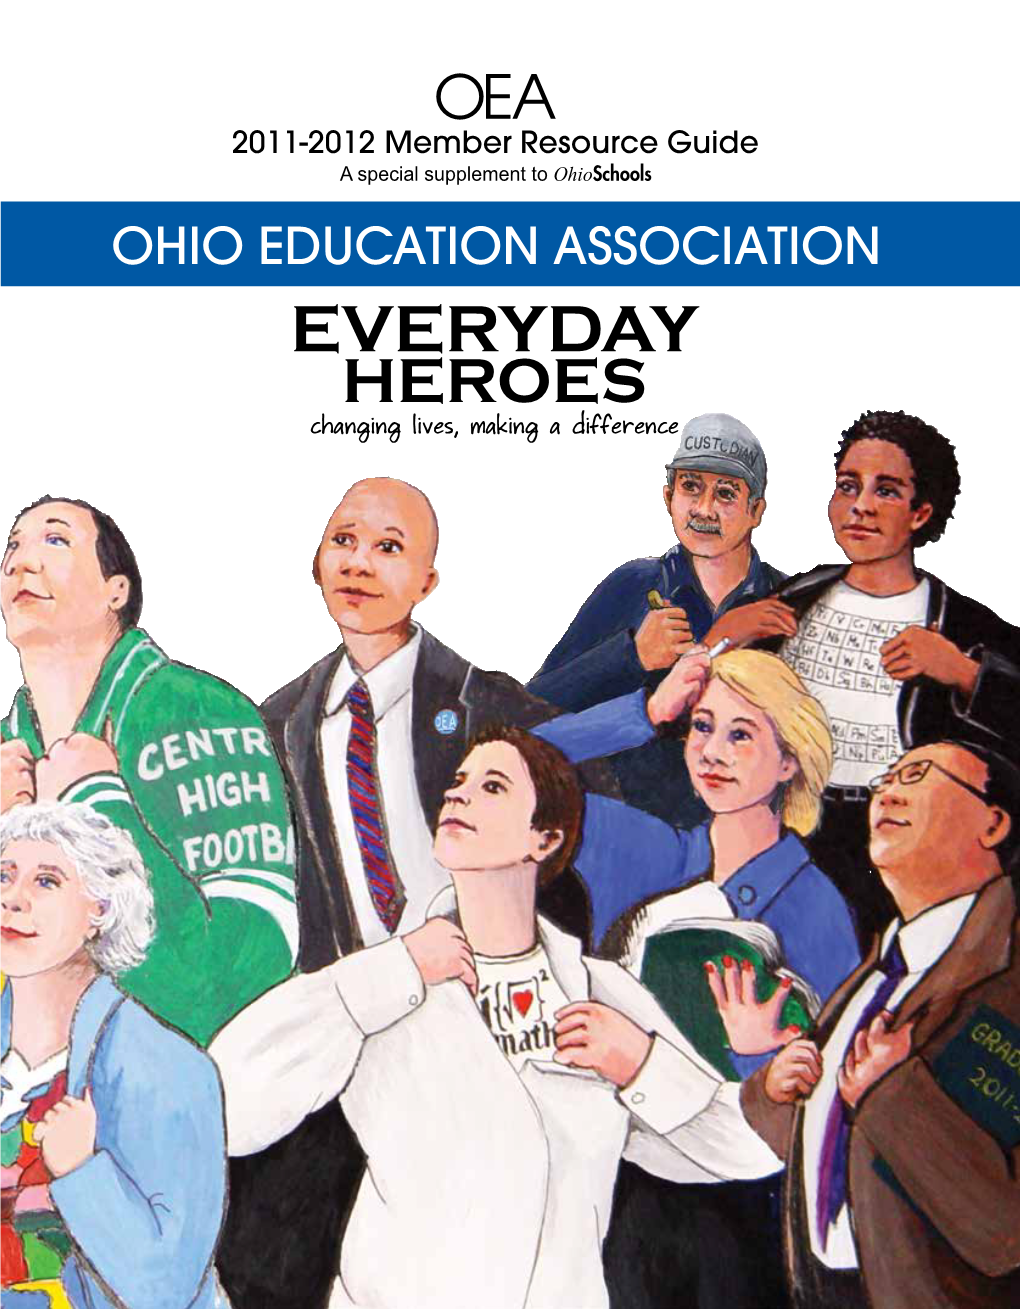 EVERYDAY HEROES Changing Lives, Making a Difference OEA MEMBER RESOURCE GUIDE